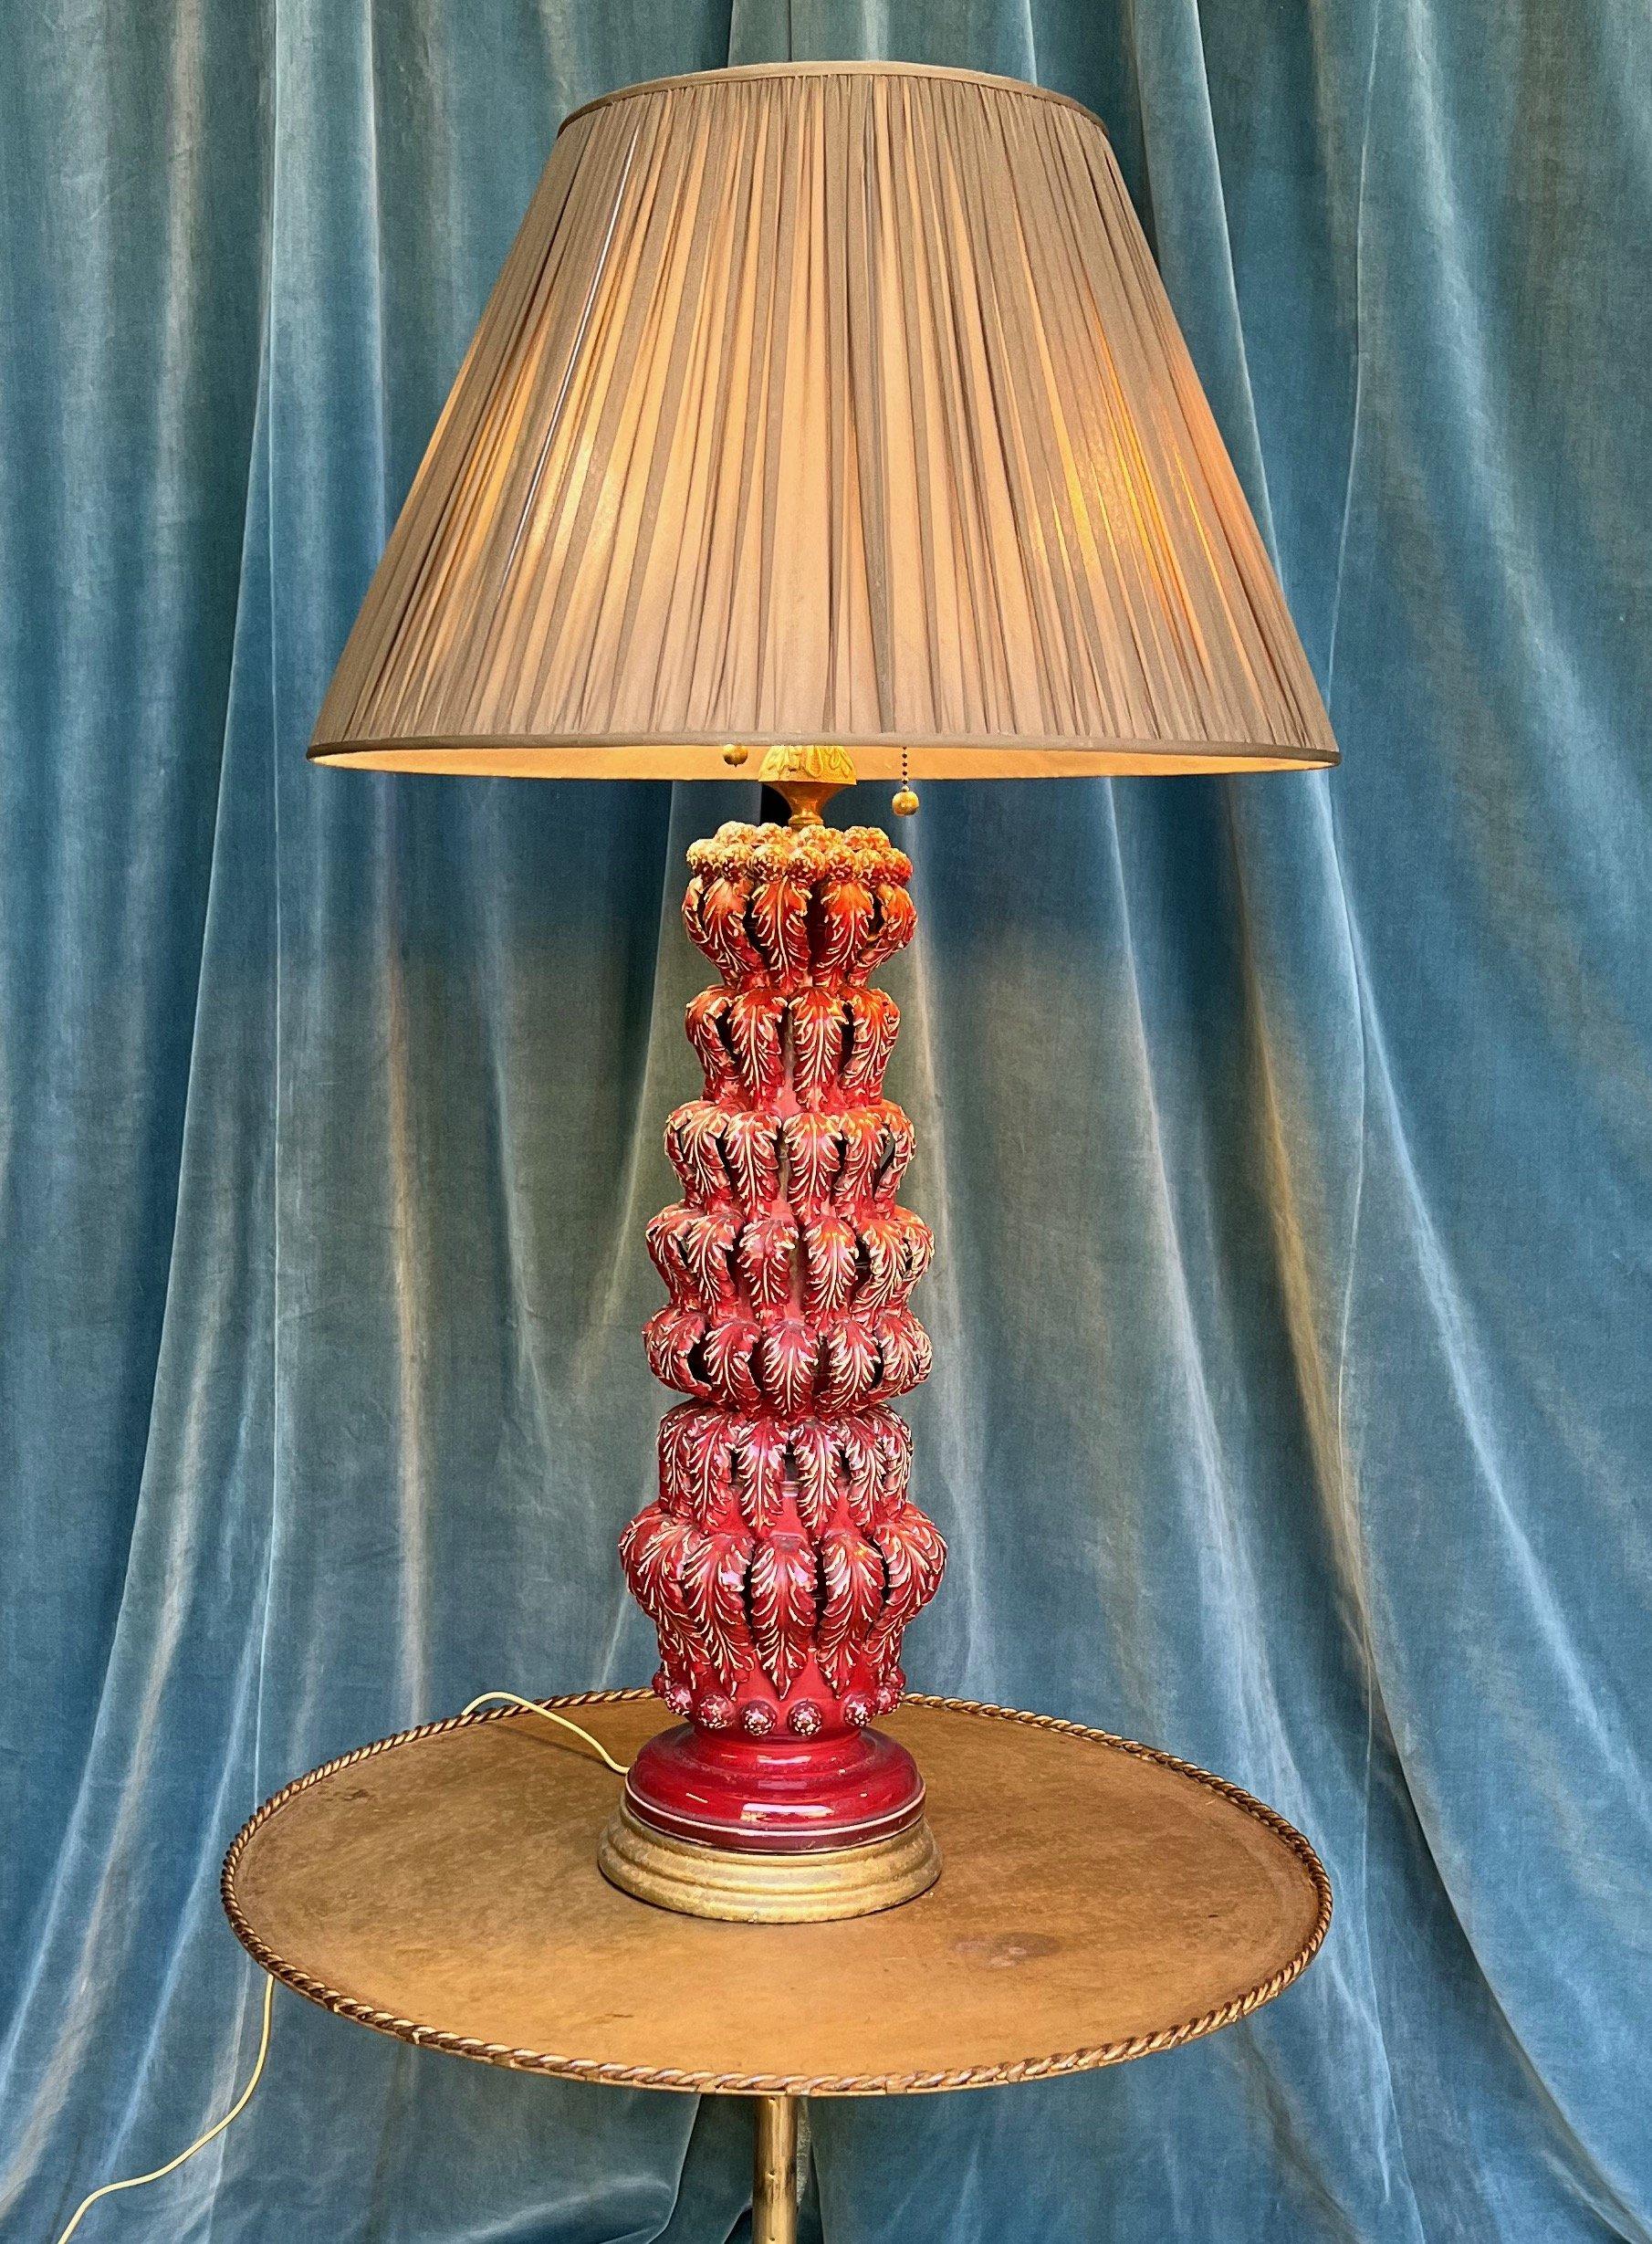 This elegant Spanish deep red glazed ceramic table lamp from the 1950s features stylized draped leaf decorations. Mounted on a giltwood base, this lamp exudes sophistication and charm, especially in its unique deep red color with white highlights.